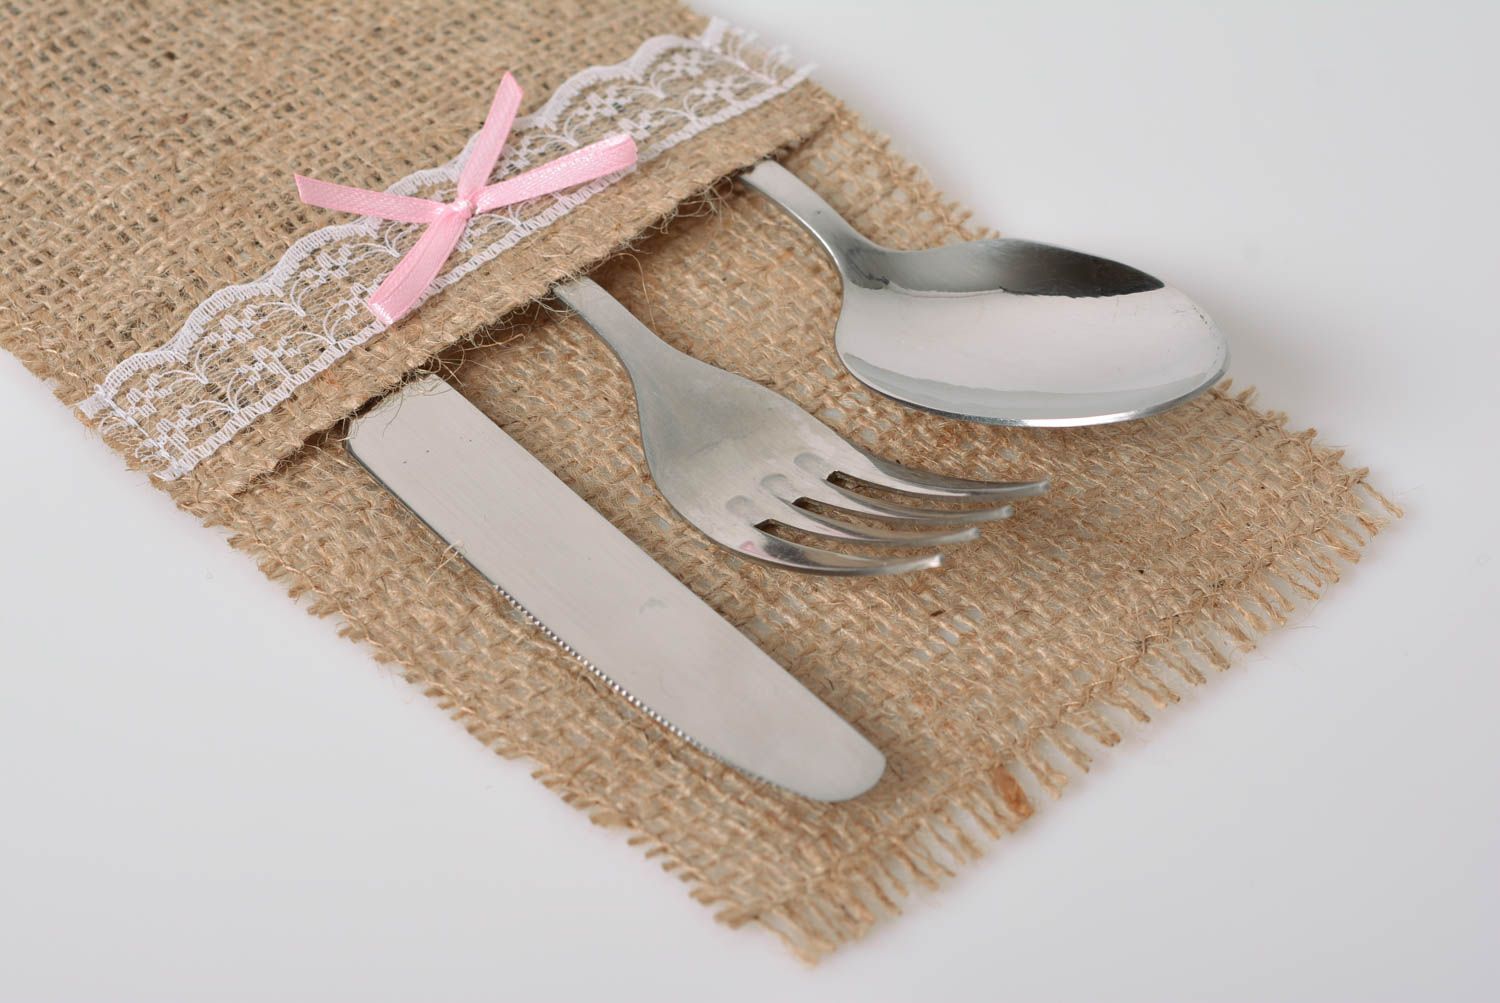 Case for cutlery made of burlap with ribbon beautiful handmade kitchen decor photo 2